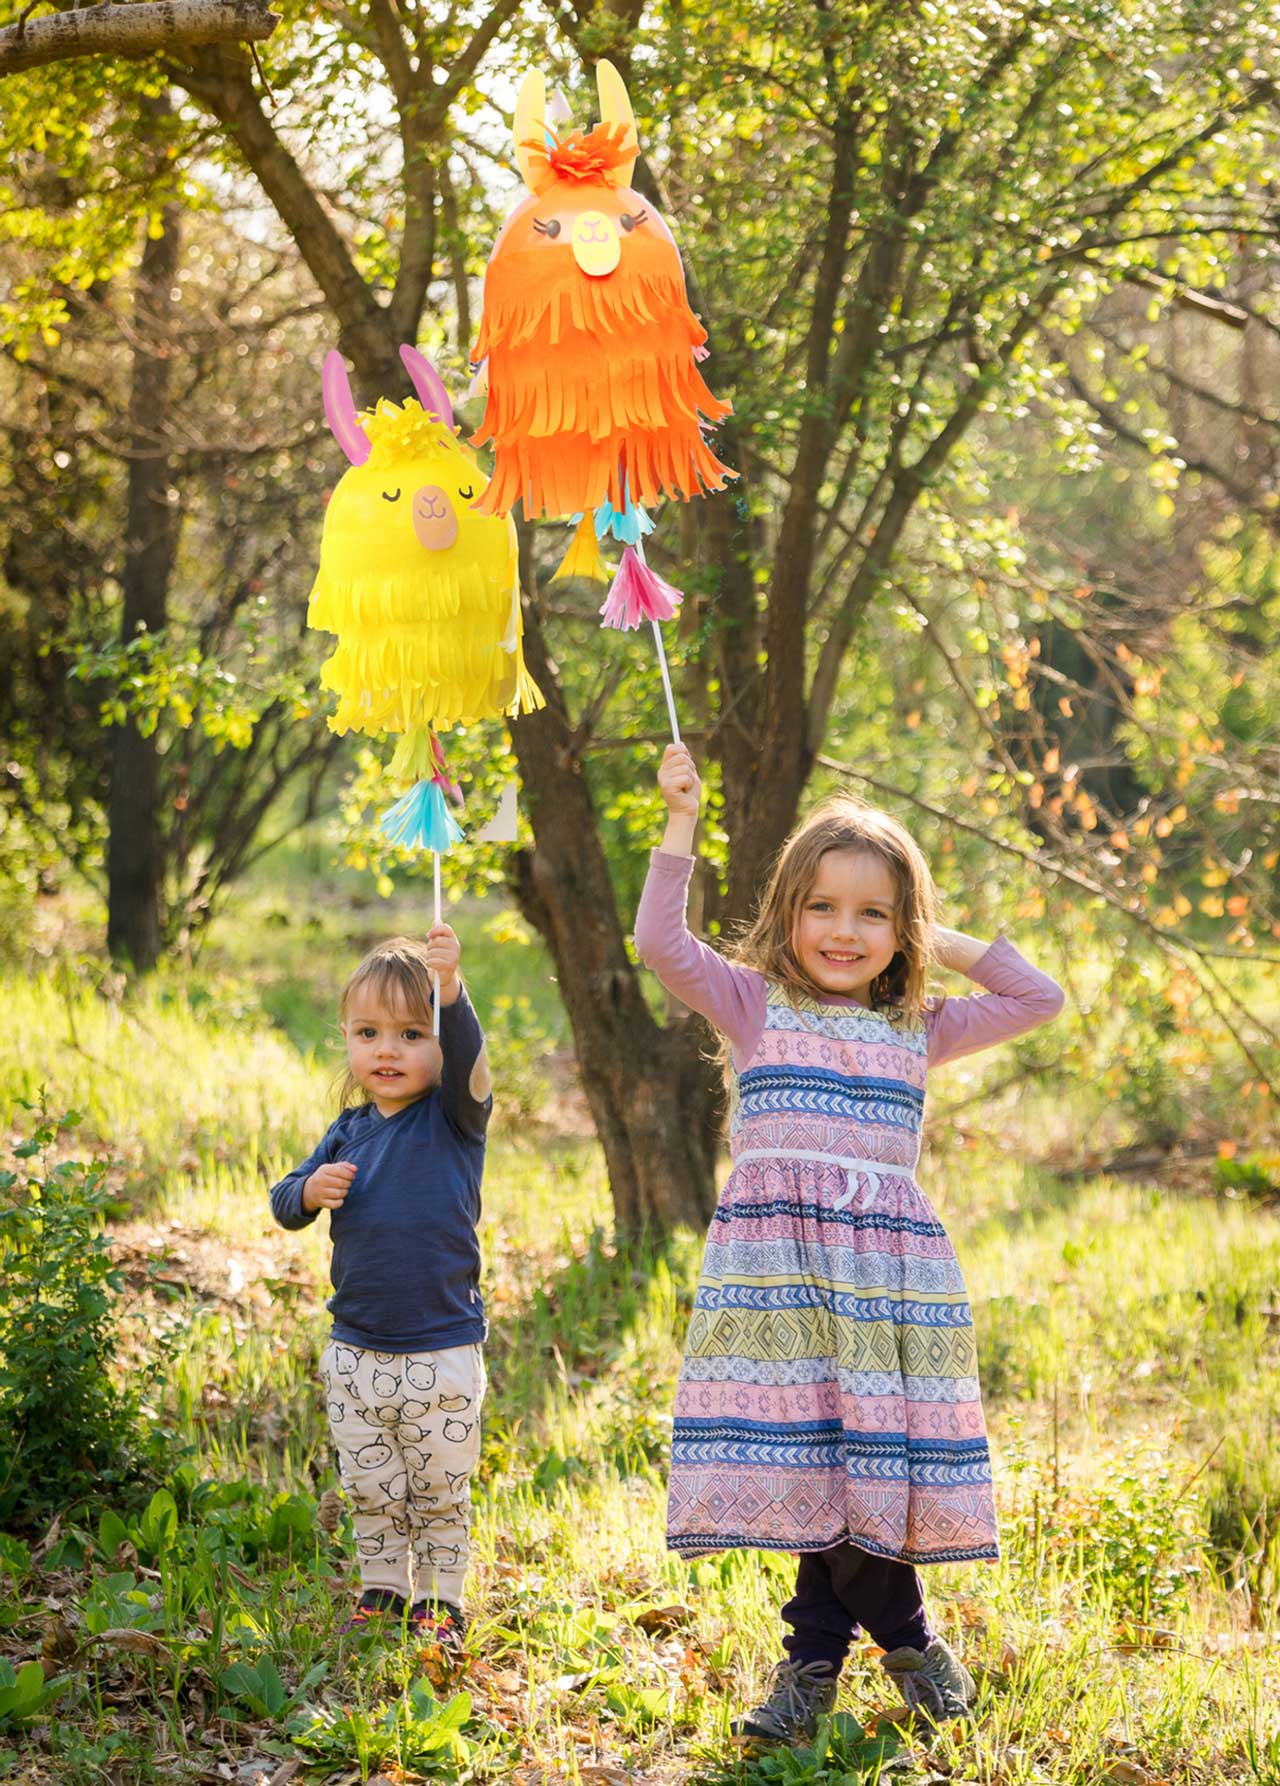 Make your own llama balloon craft project activity